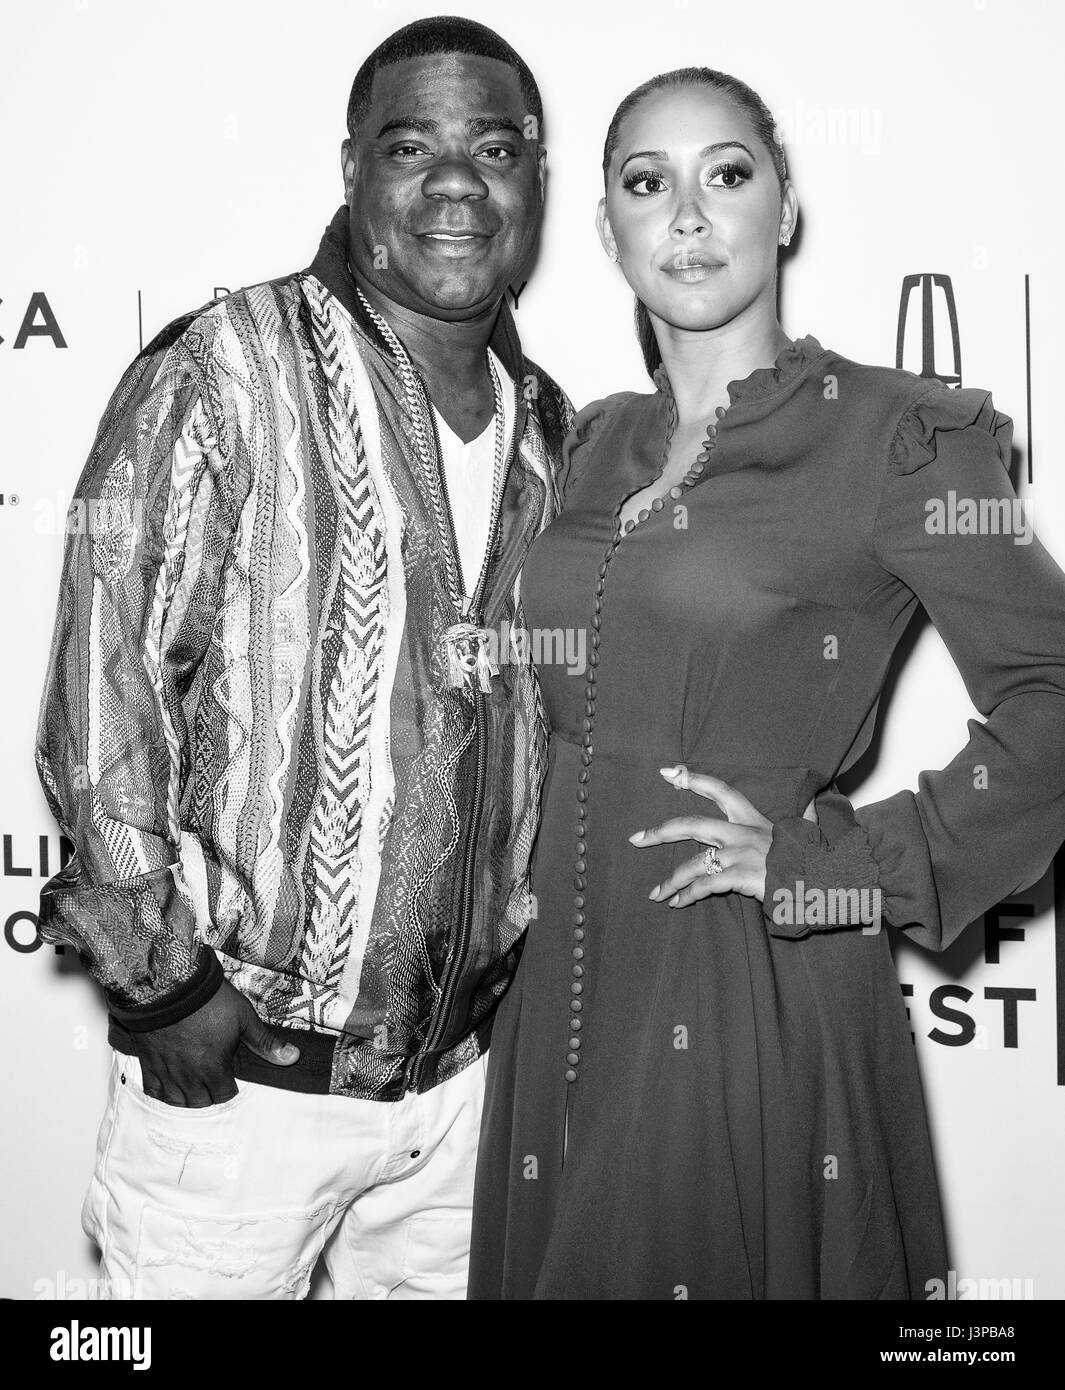 NEW YORK, NY - APRIL 23, 2017: Megan Wollover and Tracy Morgan attend 'The Clapper' Premiere during the 2017 Tribeca Film Festival at SVA Theatre Stock Photo